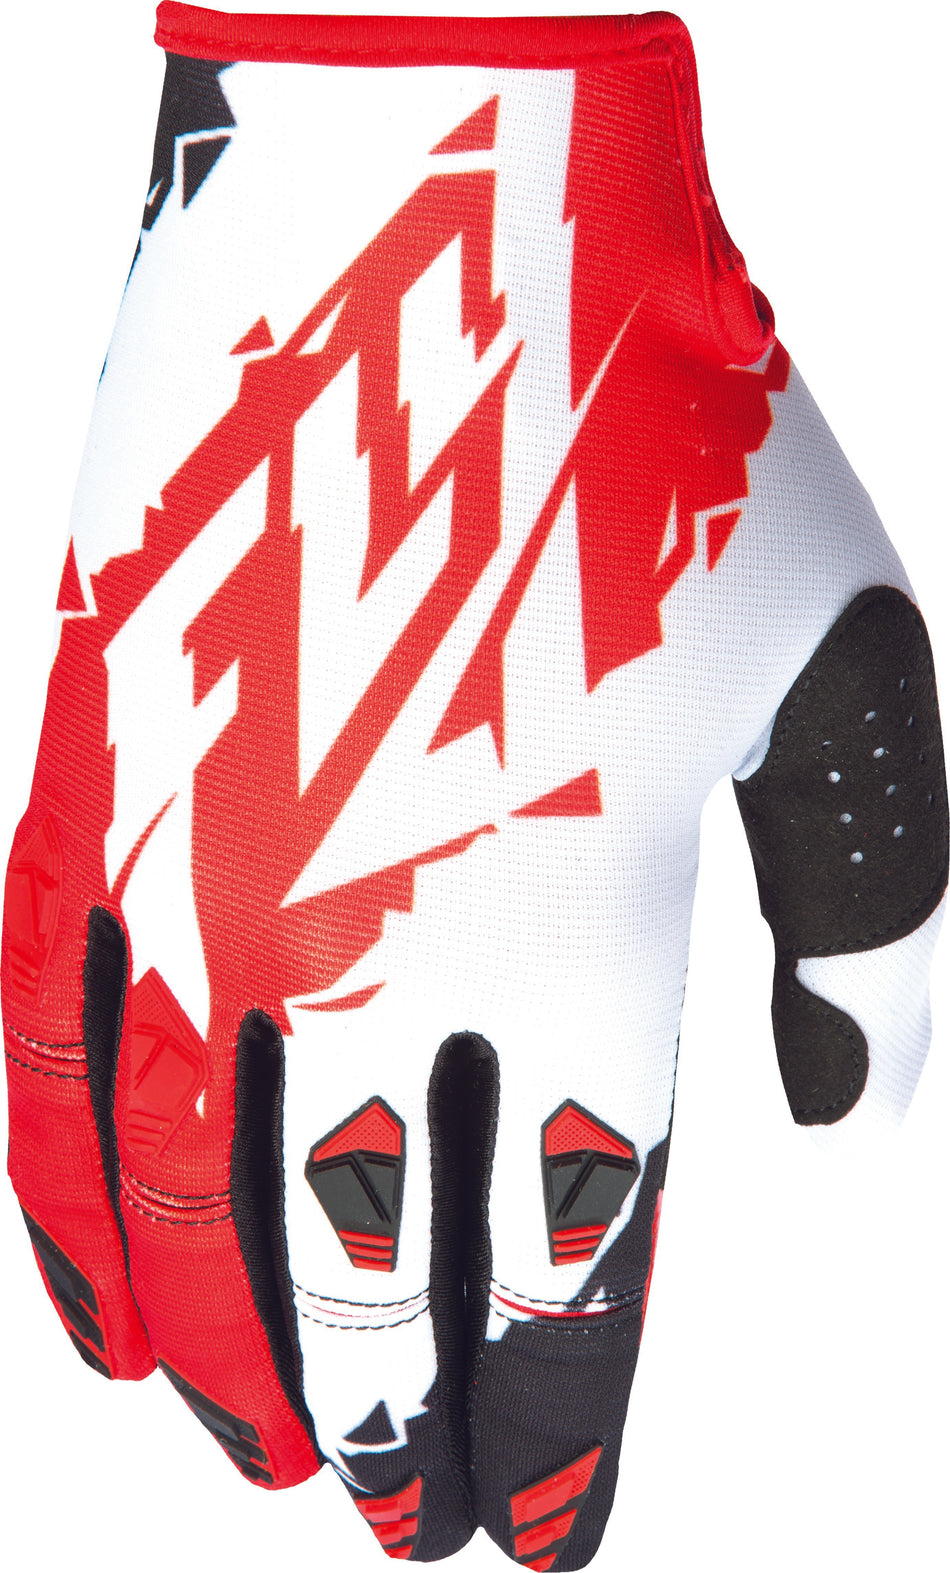 FLY RACING Kinetic Glove Red/White Sz 11 X 370-41411